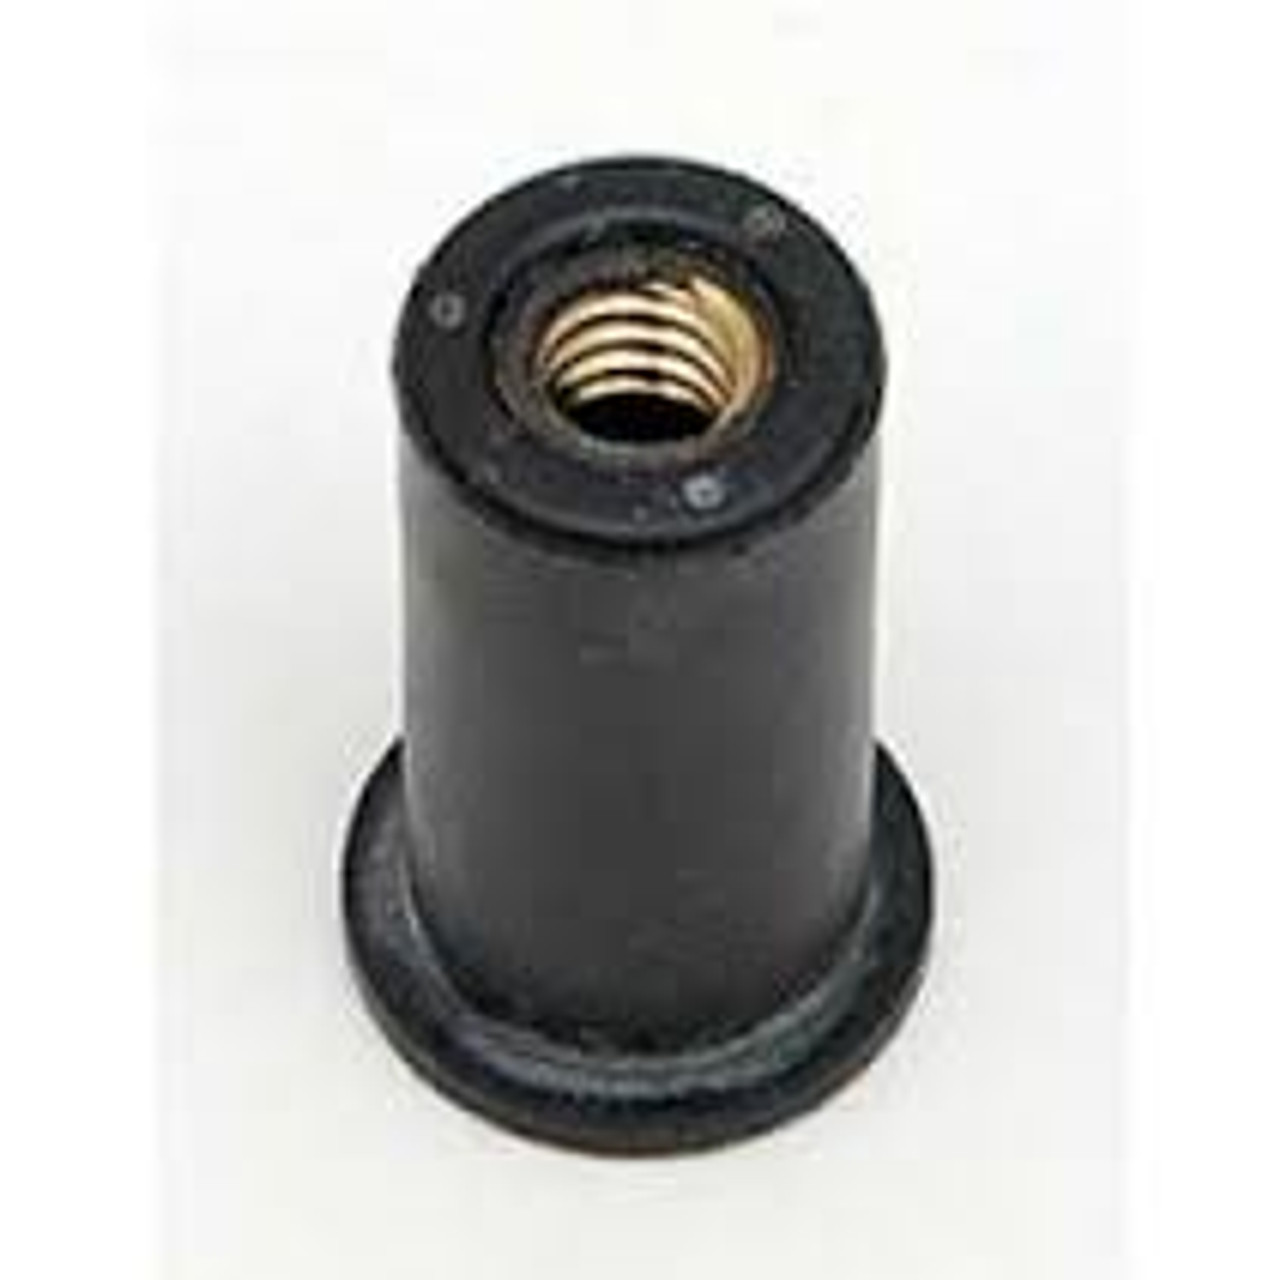 Well Nut
Thread Size: #10 - 24
Range: .030 - .227"
Material: Neoprene With Captive Brass Nut
GM OEM#: 3876130
Voltage Regulator & Dome Light
25 Per Box
Click Next Images For Well Nut Size Charts